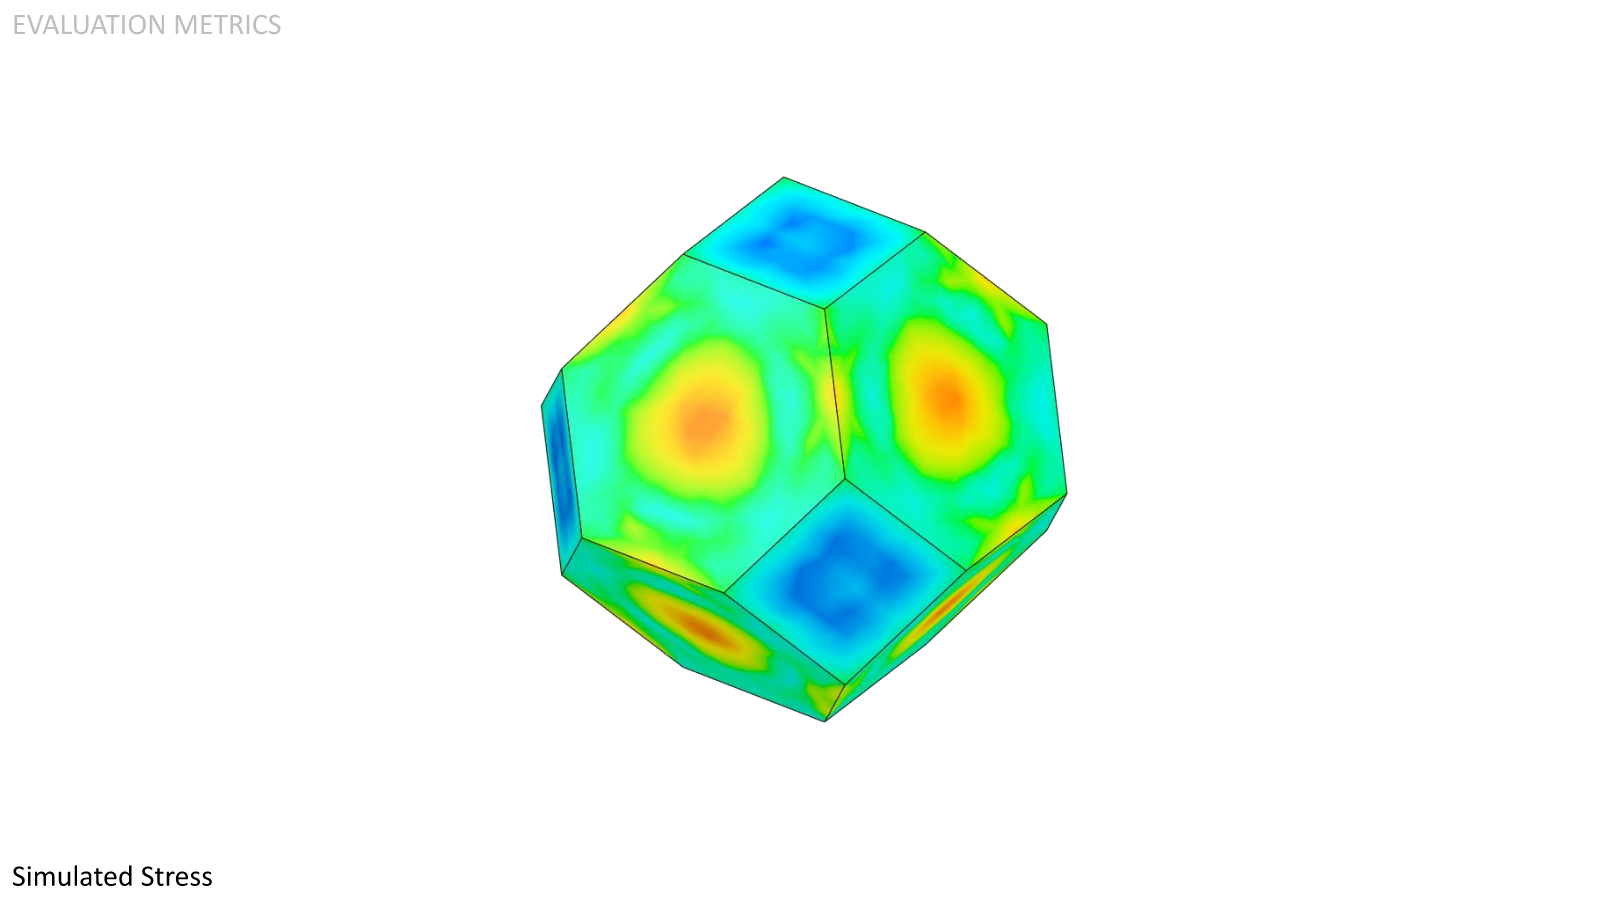  Simulated Stress. Each polyhedron was modeled in Fusion 360 as hollow solids, they were internally pressurized, and the max stress was recorded. Again, the lower the stress, the better. 